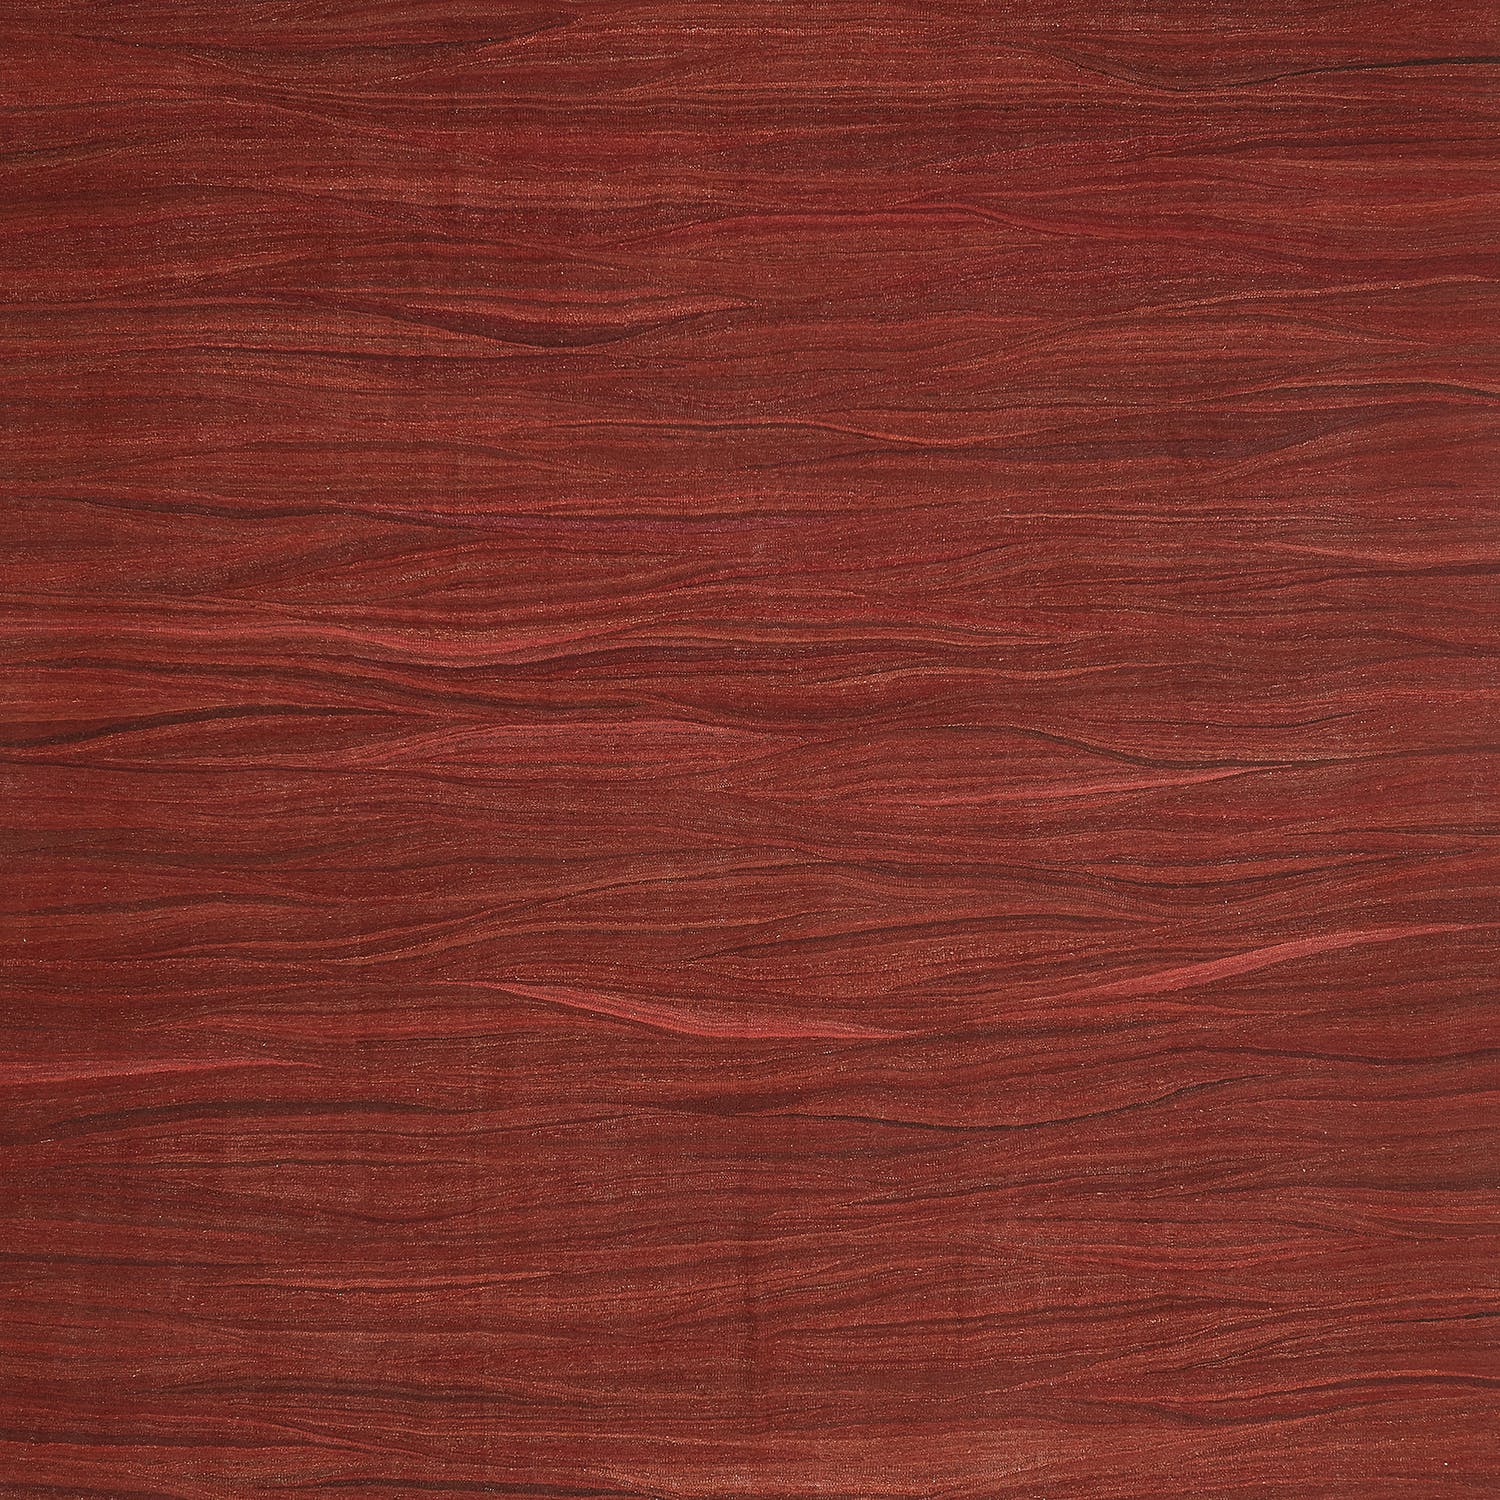 Close-up view of rich red wood texture with natural grain patterns.